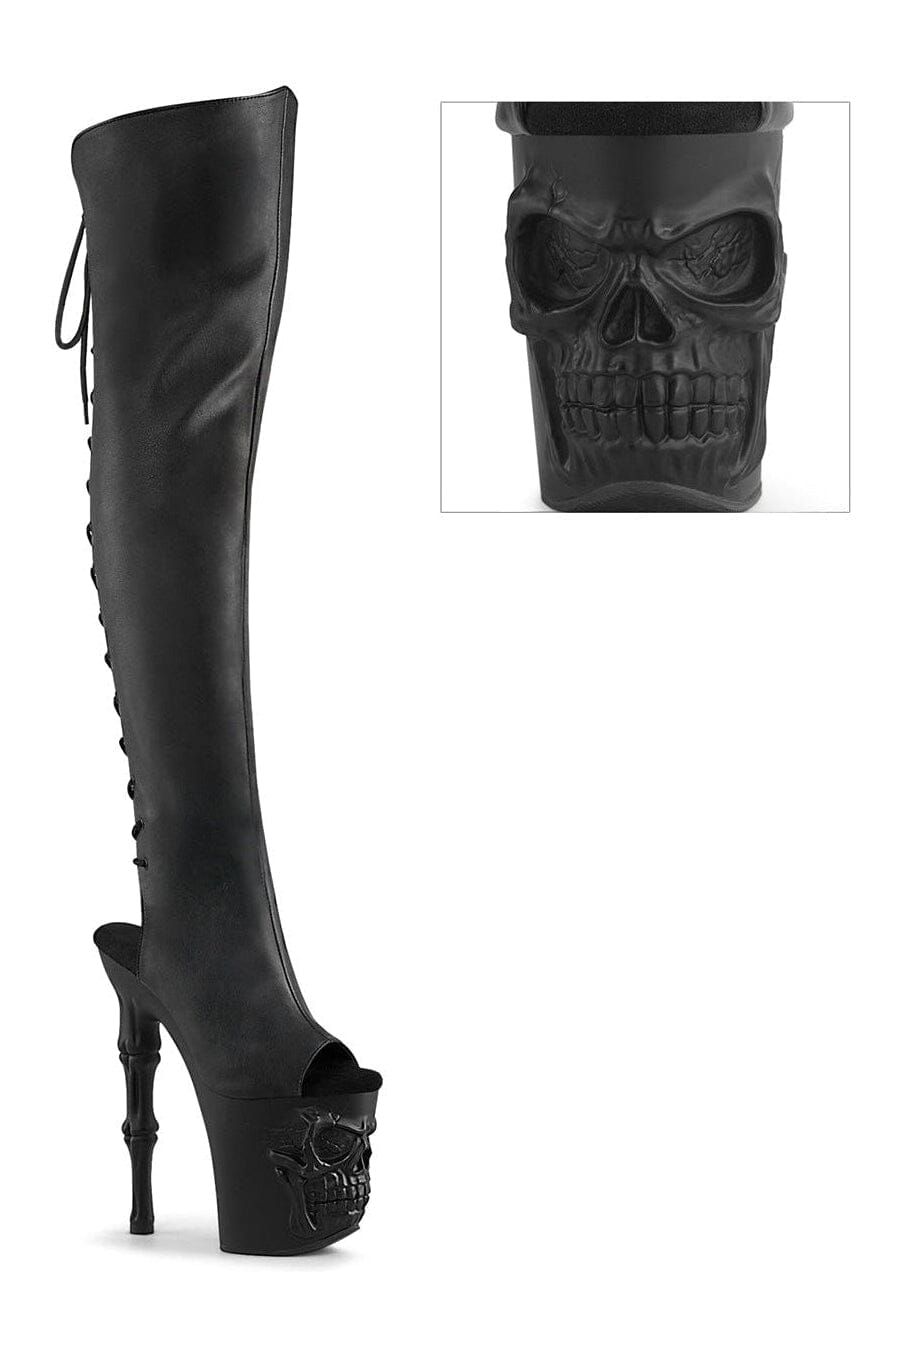 RAPTURE-3019 Black Faux Leather Knee Boot-Knee Boots-Pleaser-Black-10-Faux Leather-SEXYSHOES.COM